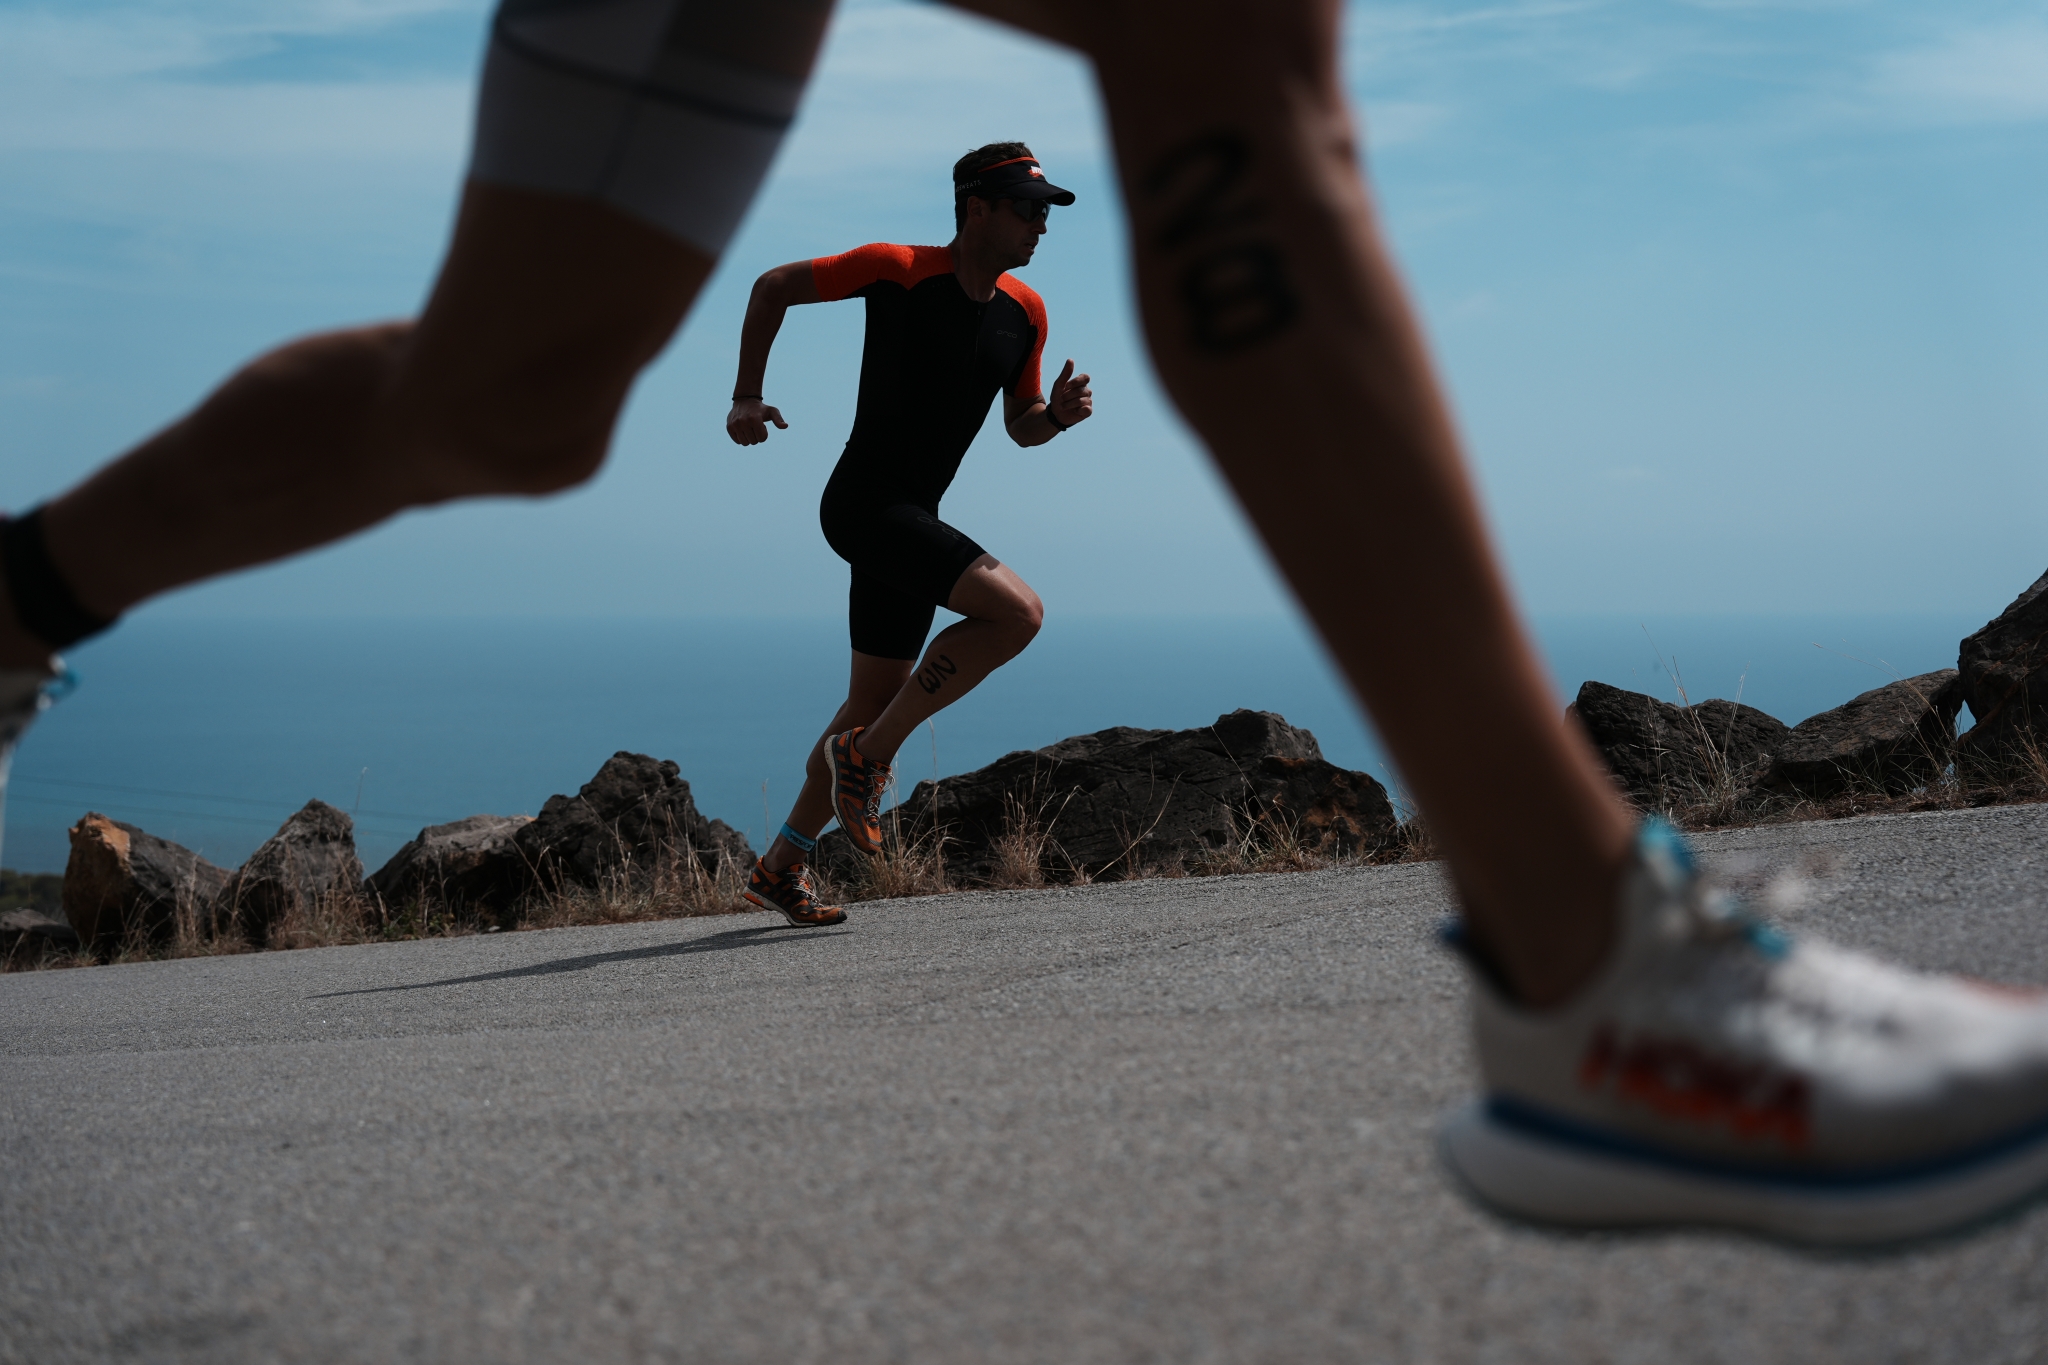 Male runner running along a road by the sea, viewed from between another runner's legs in bokeh foreground